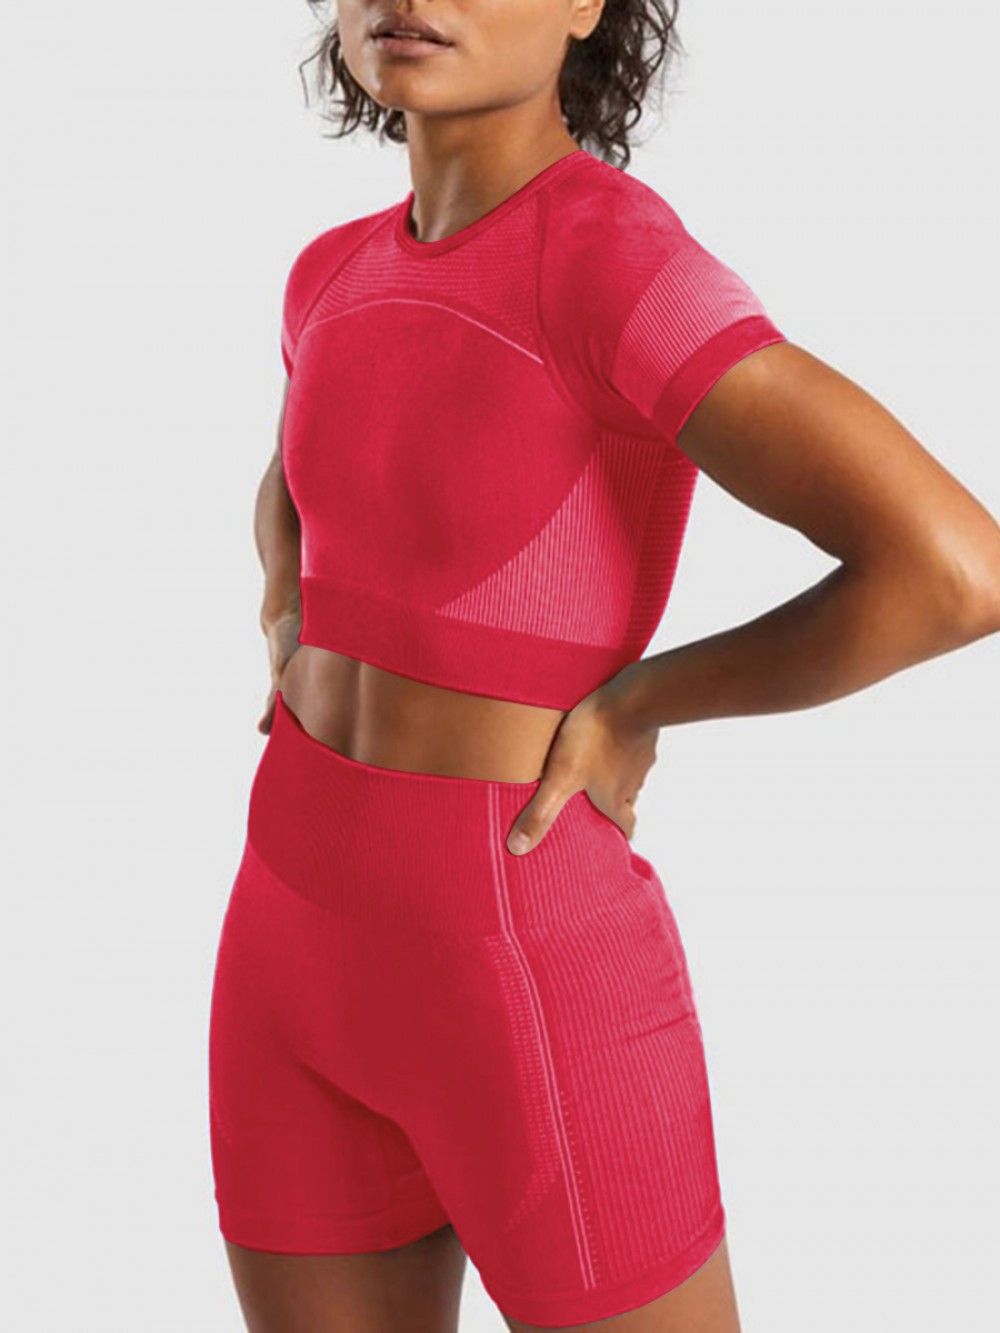 Ultimate Fit Rose Red Cutout Back Sports Suit Round Neck